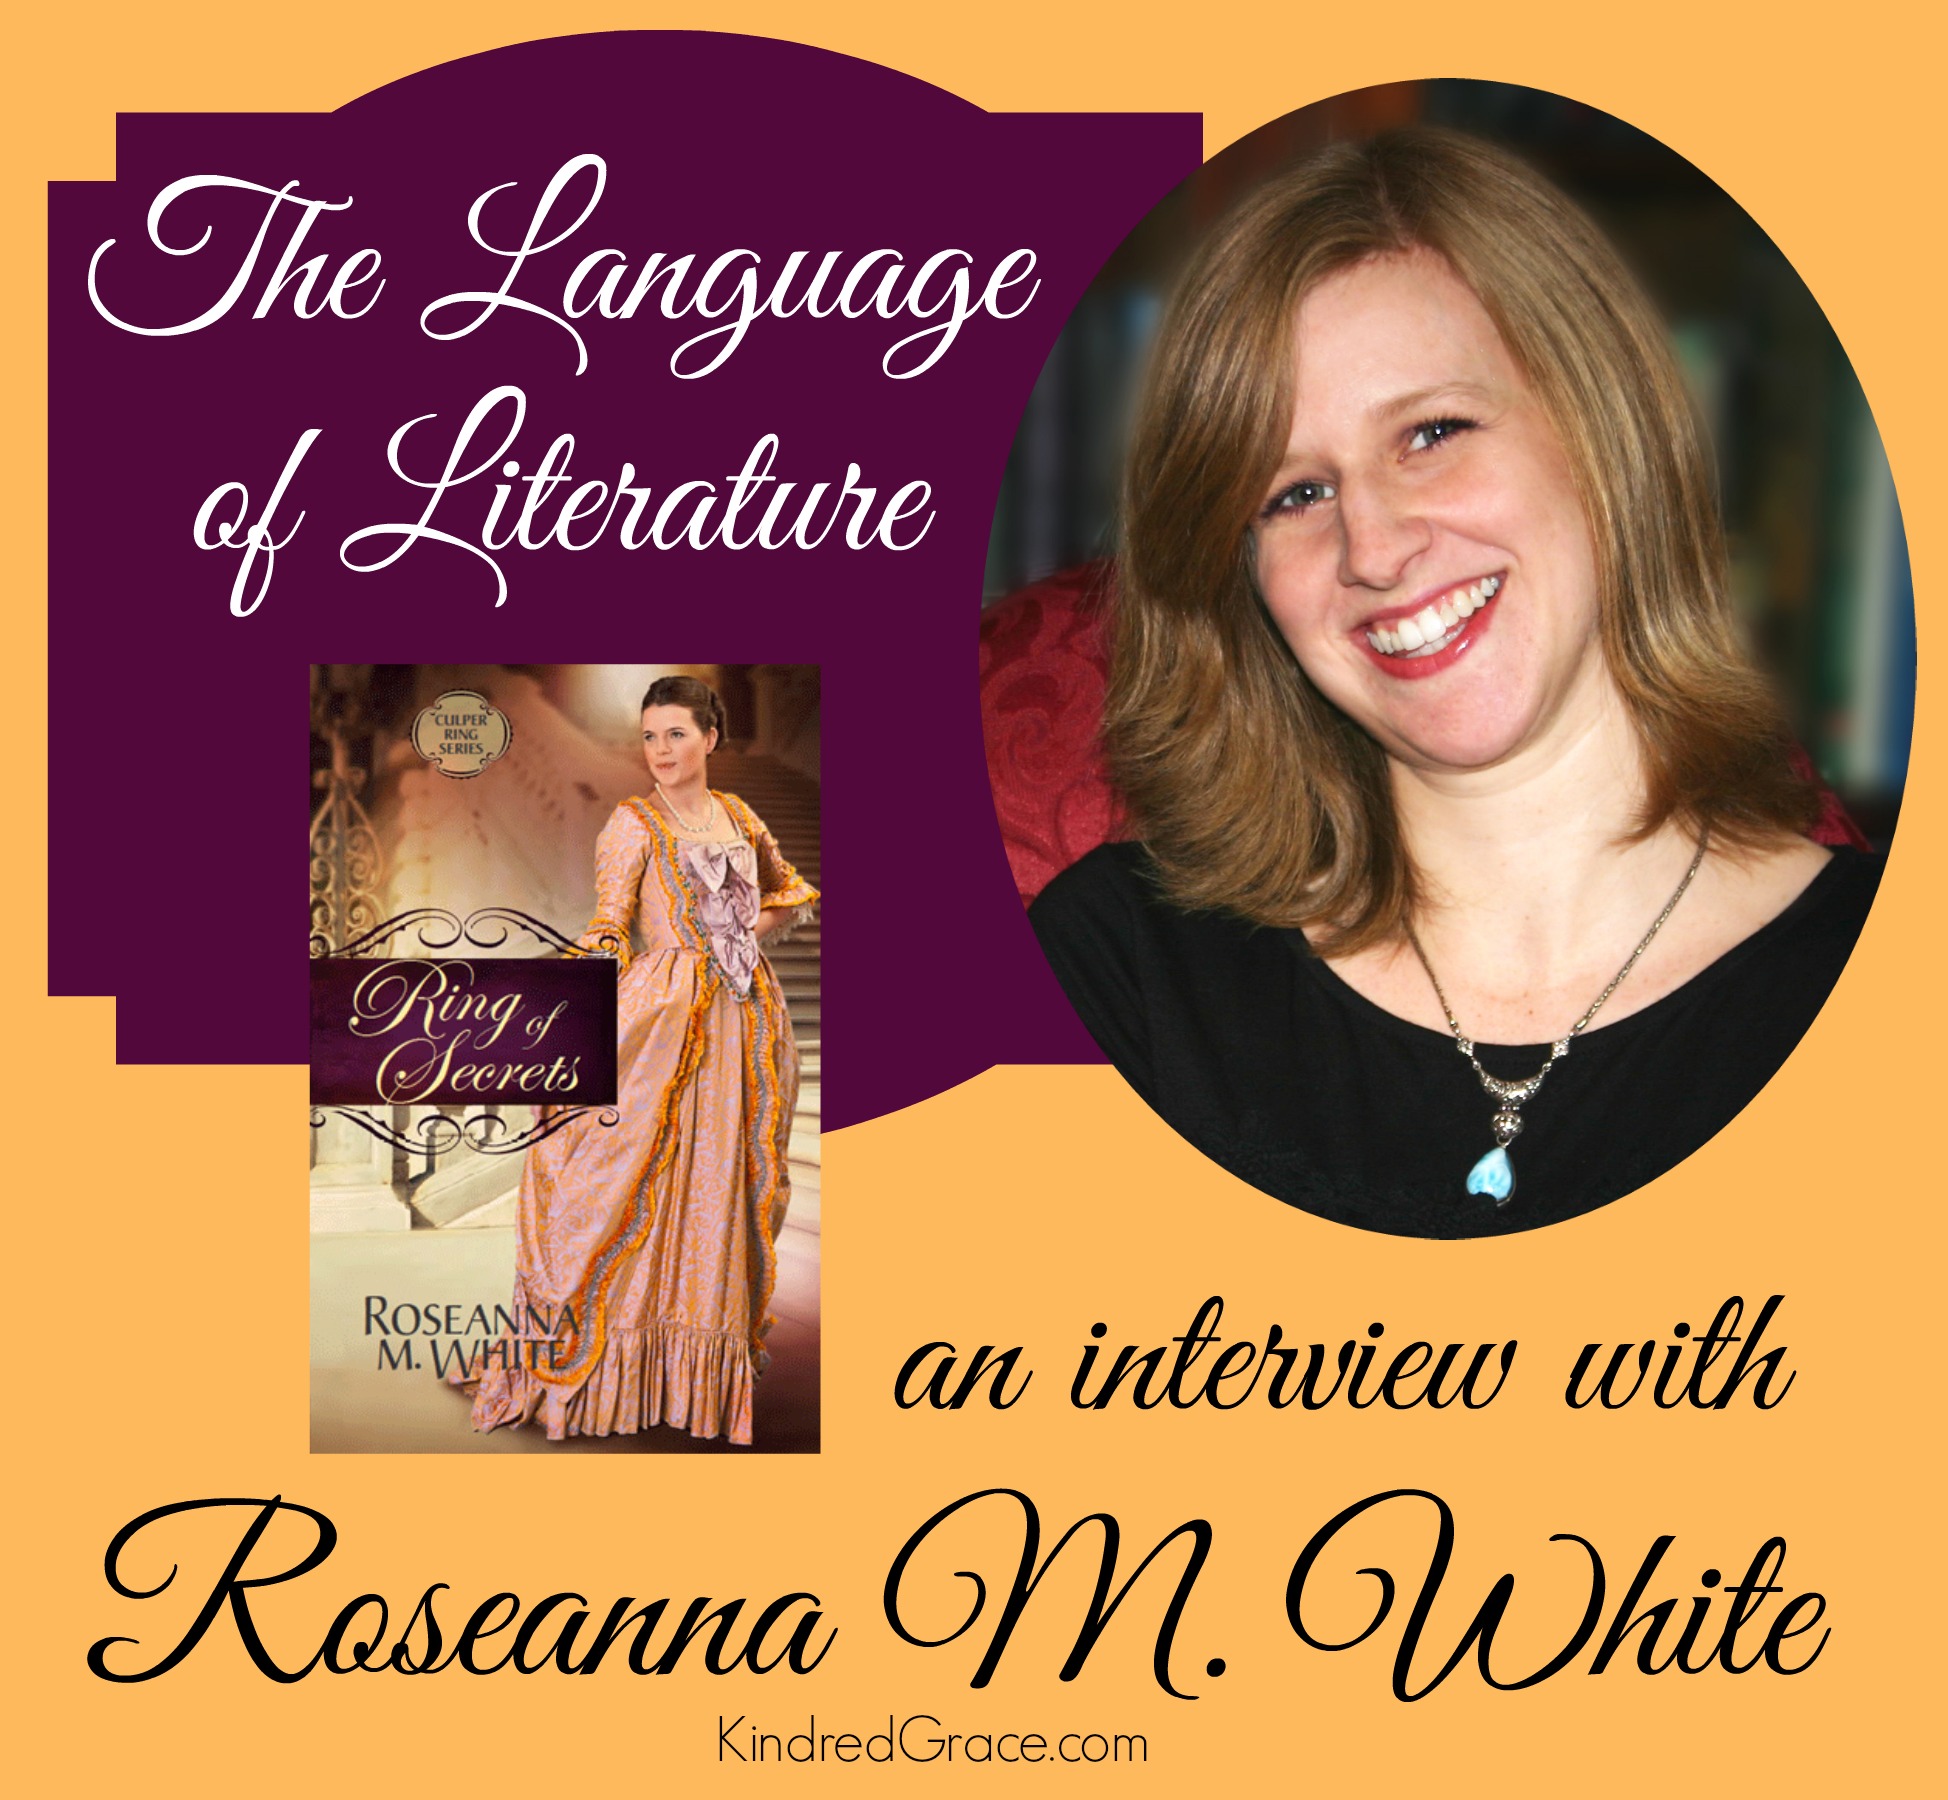 The Language of Literature: An Interview with Roseanna M. White